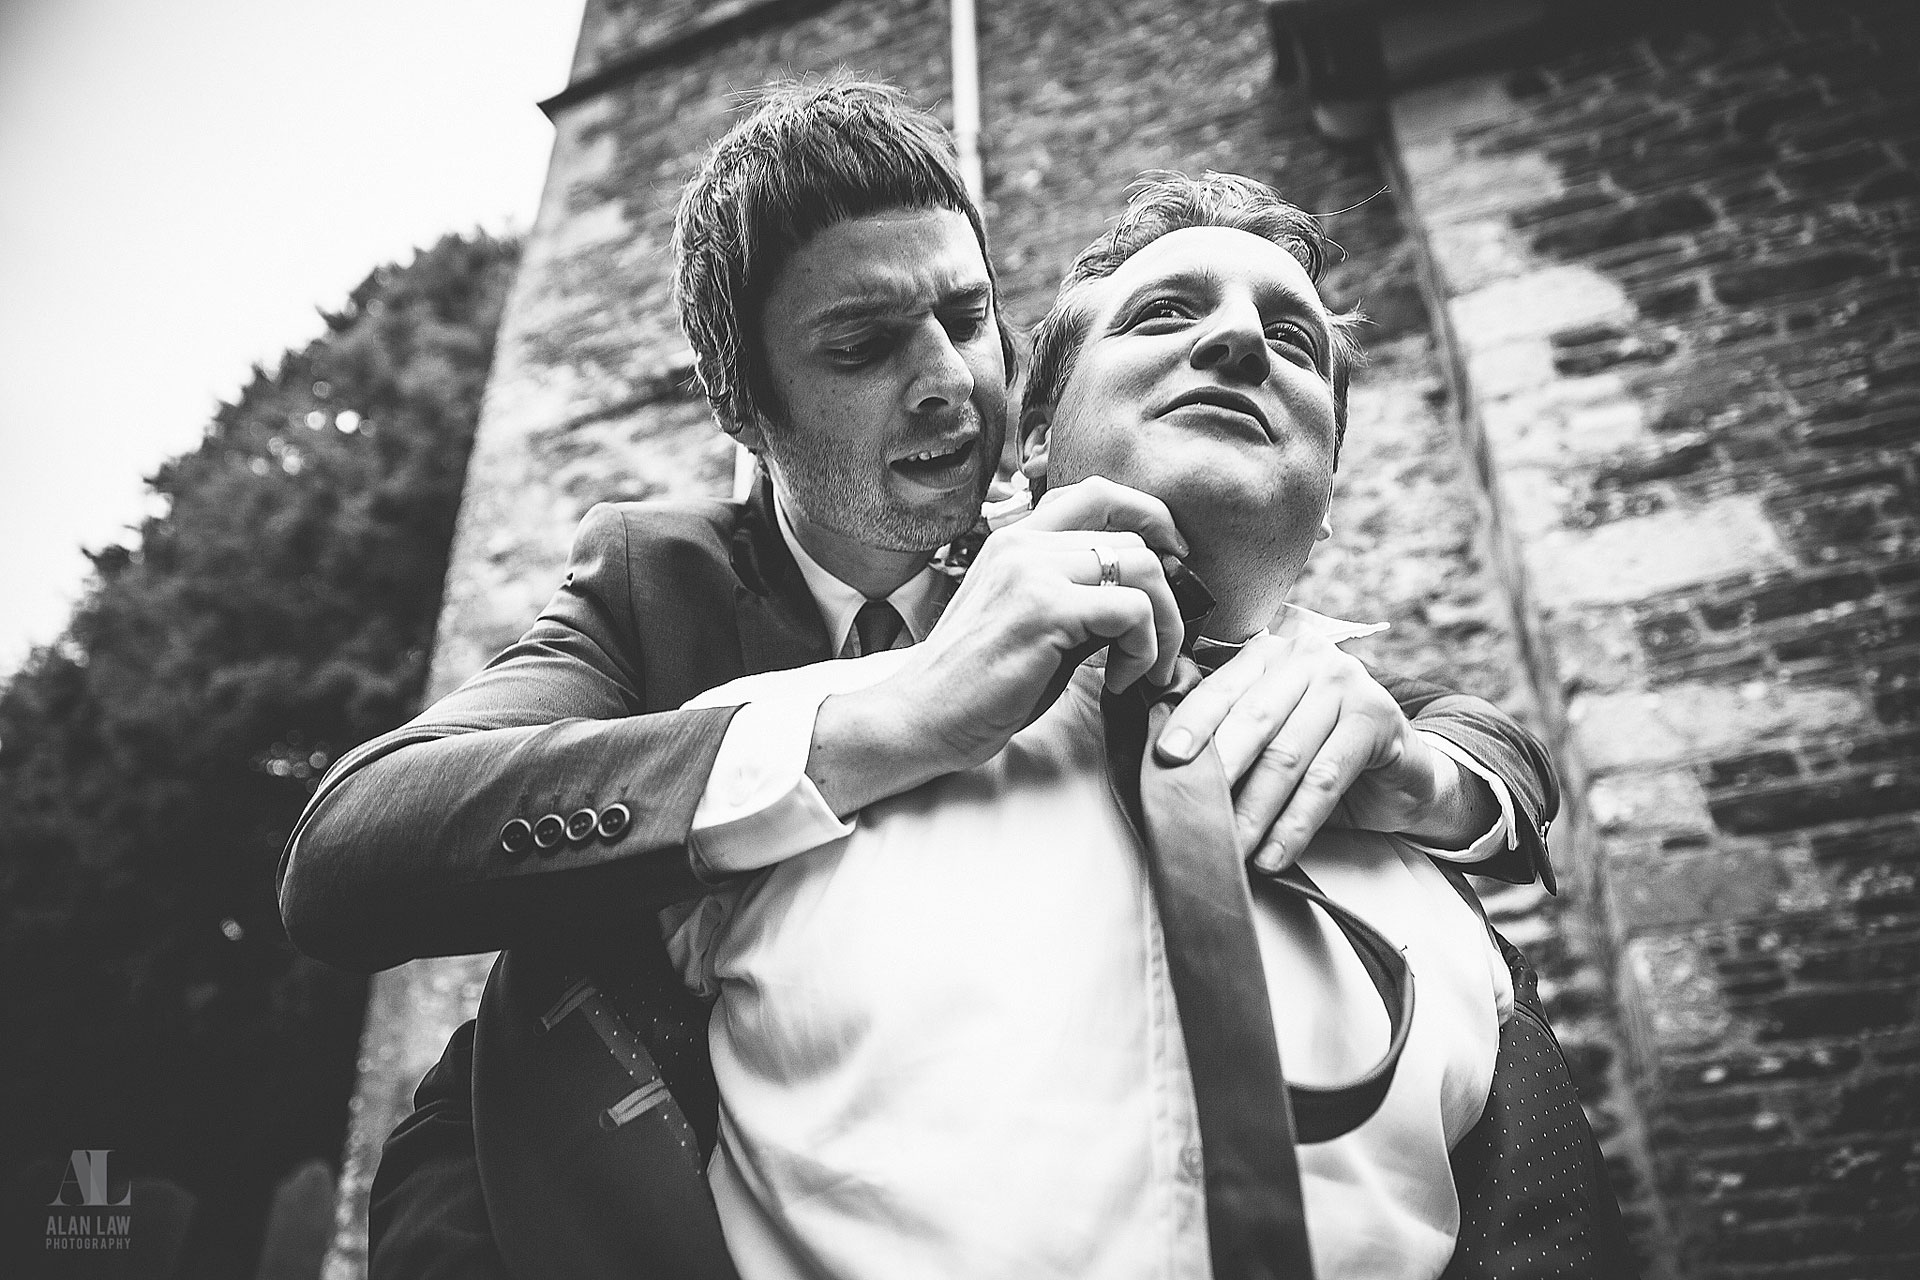 ’10 of the Best Creative and Quirky Wedding Photographers in the UK’